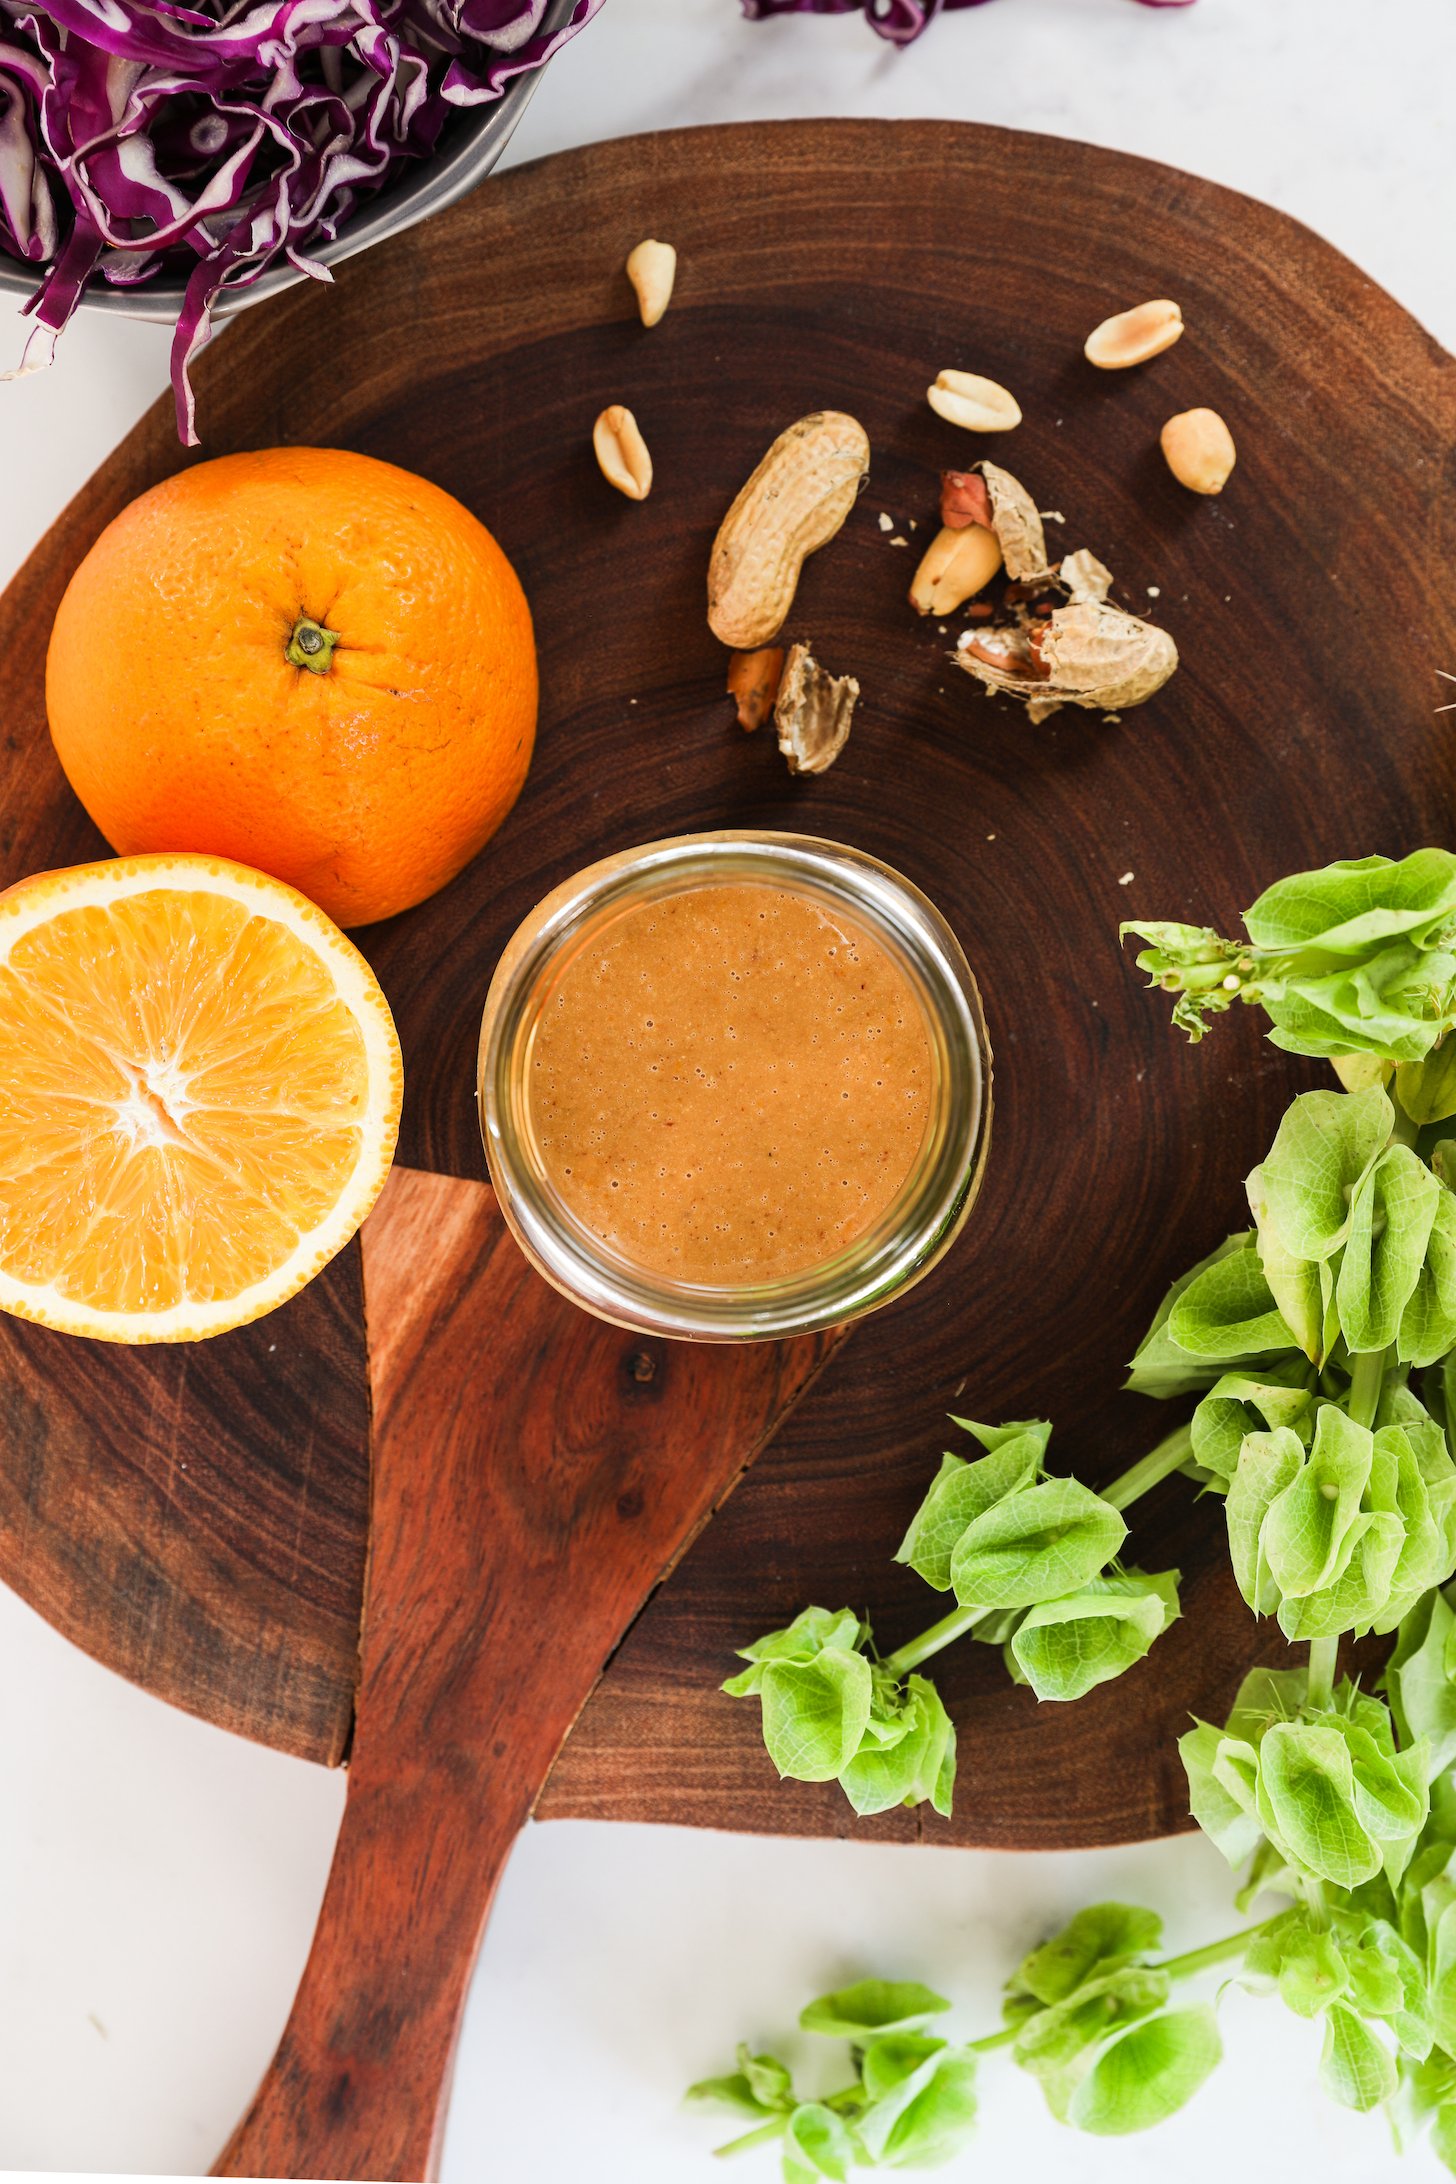 Flat lay of a small jar of dressing surrounded by an orange half, peanuts, and a green plant.